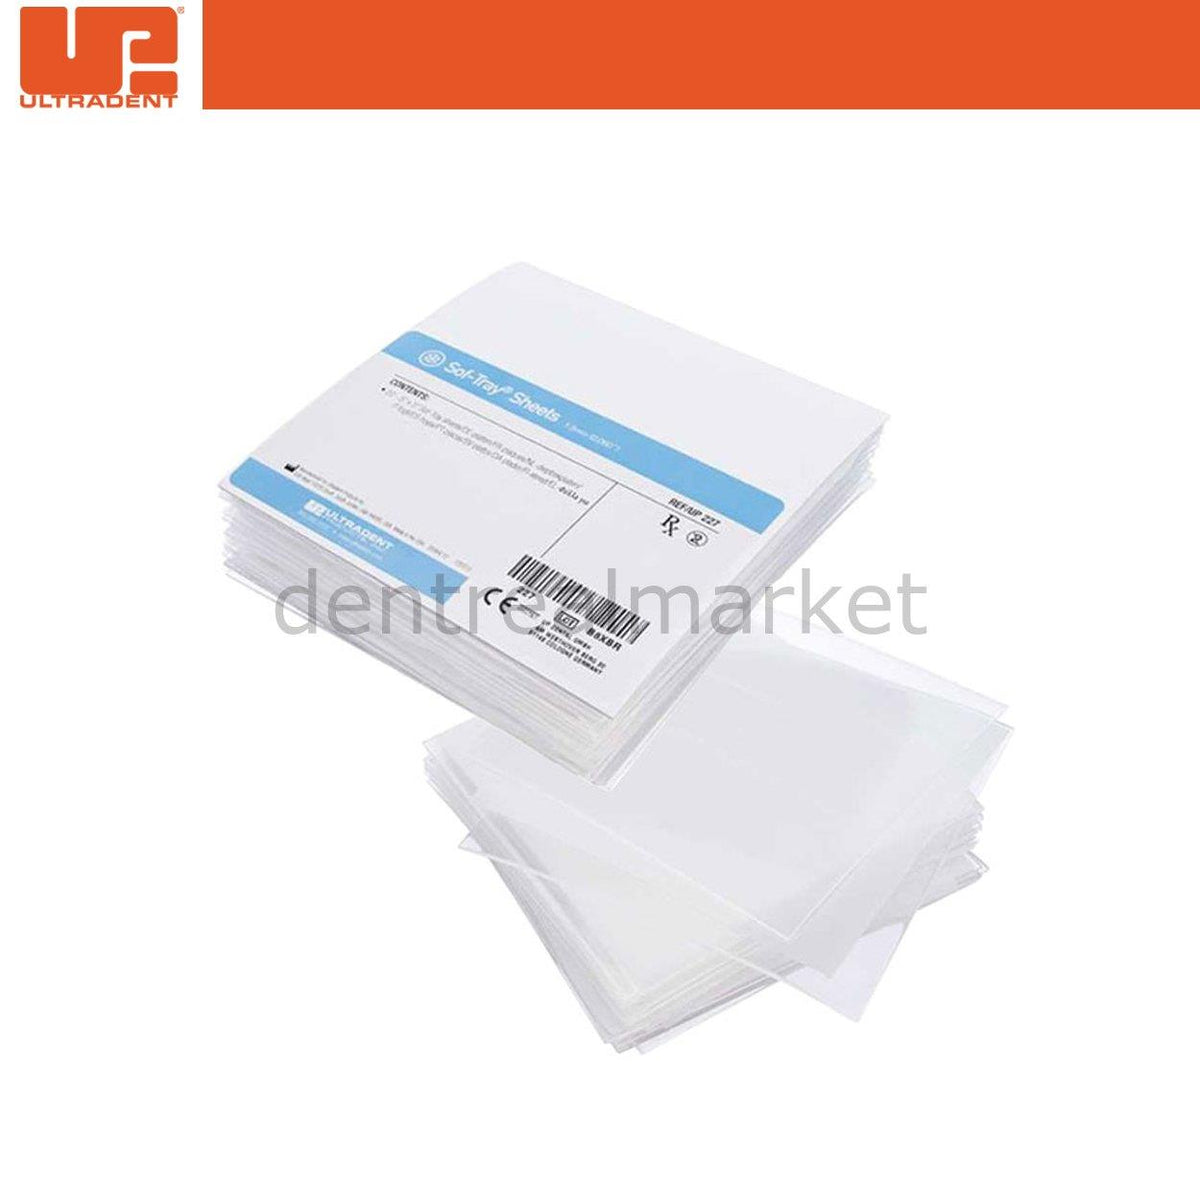 DentrealStore - Ultradent Sof-Tray Sheet Material for Vacuum-Forming of Trays